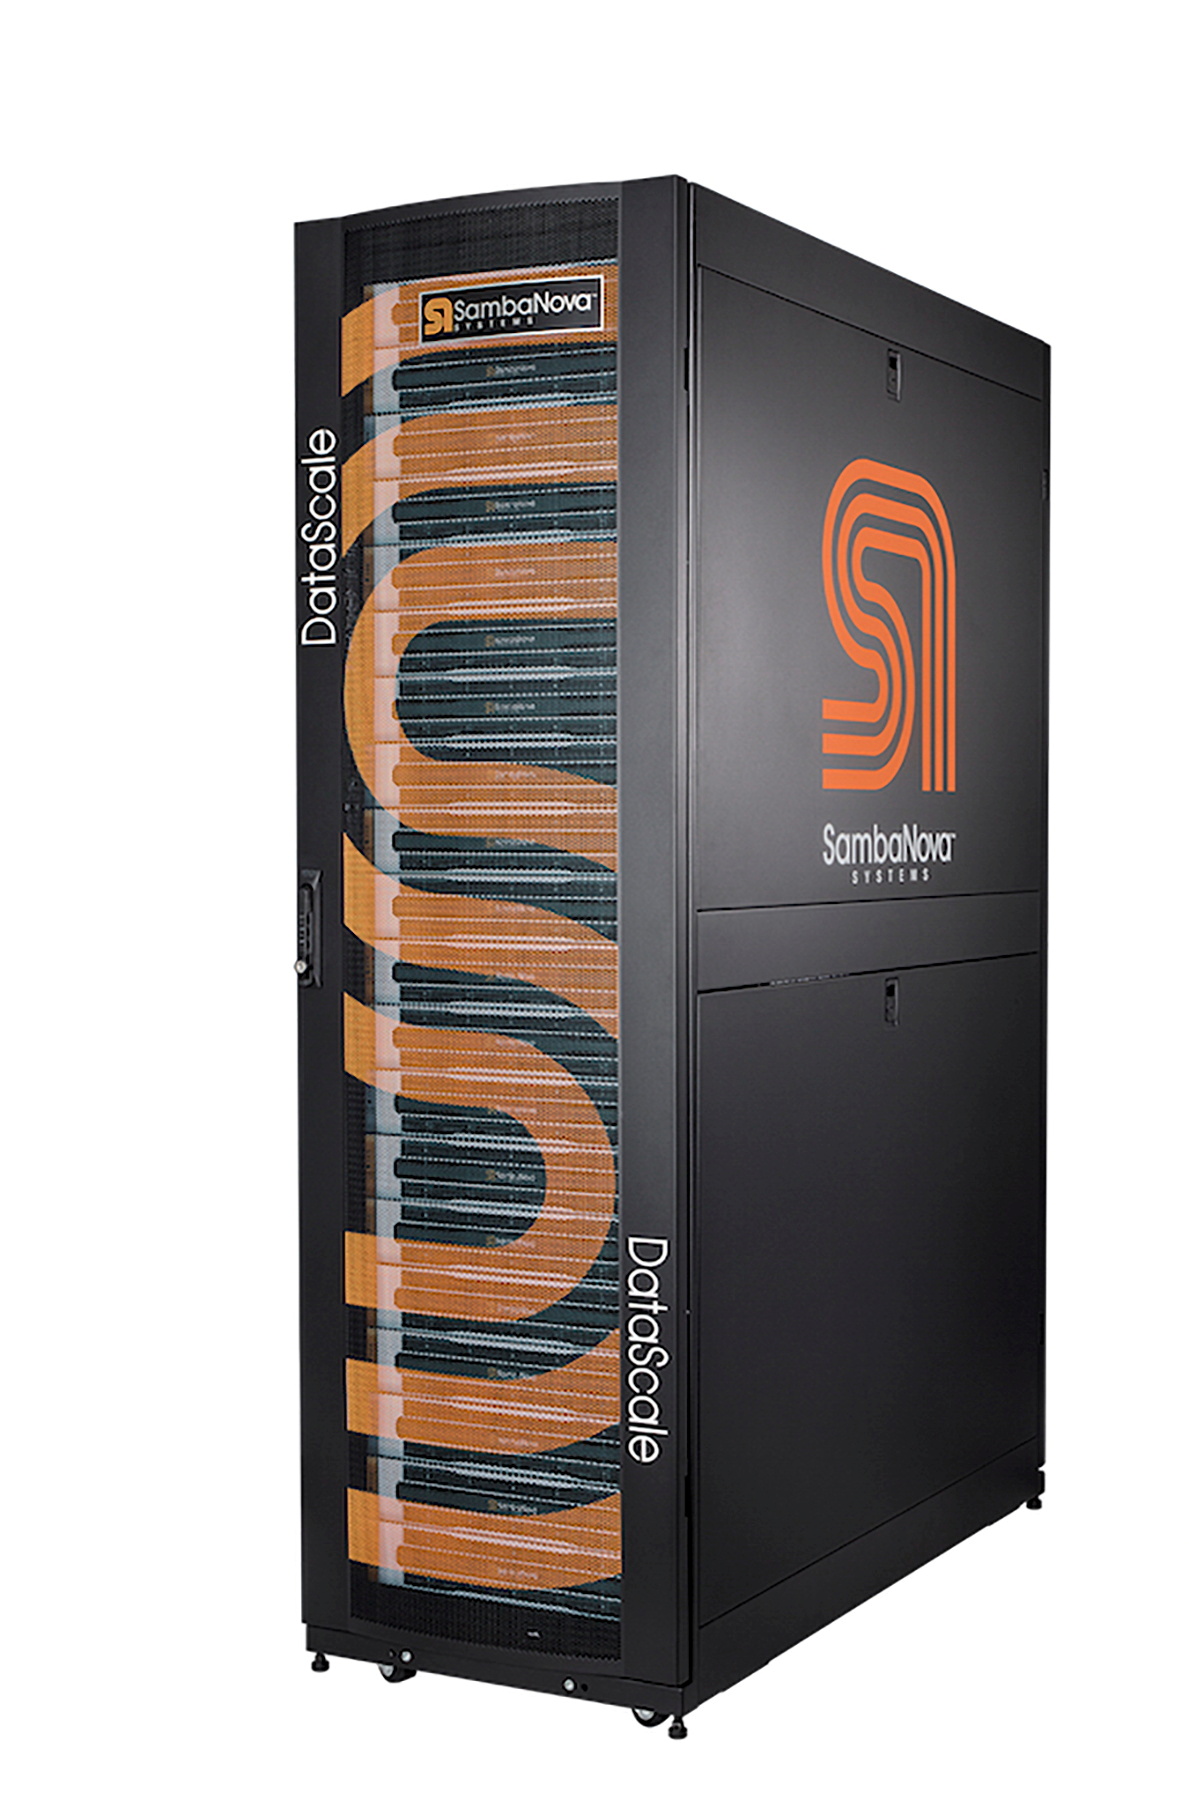 A data center server rack shows the logo of SambaNova Systems in this undated handout photo